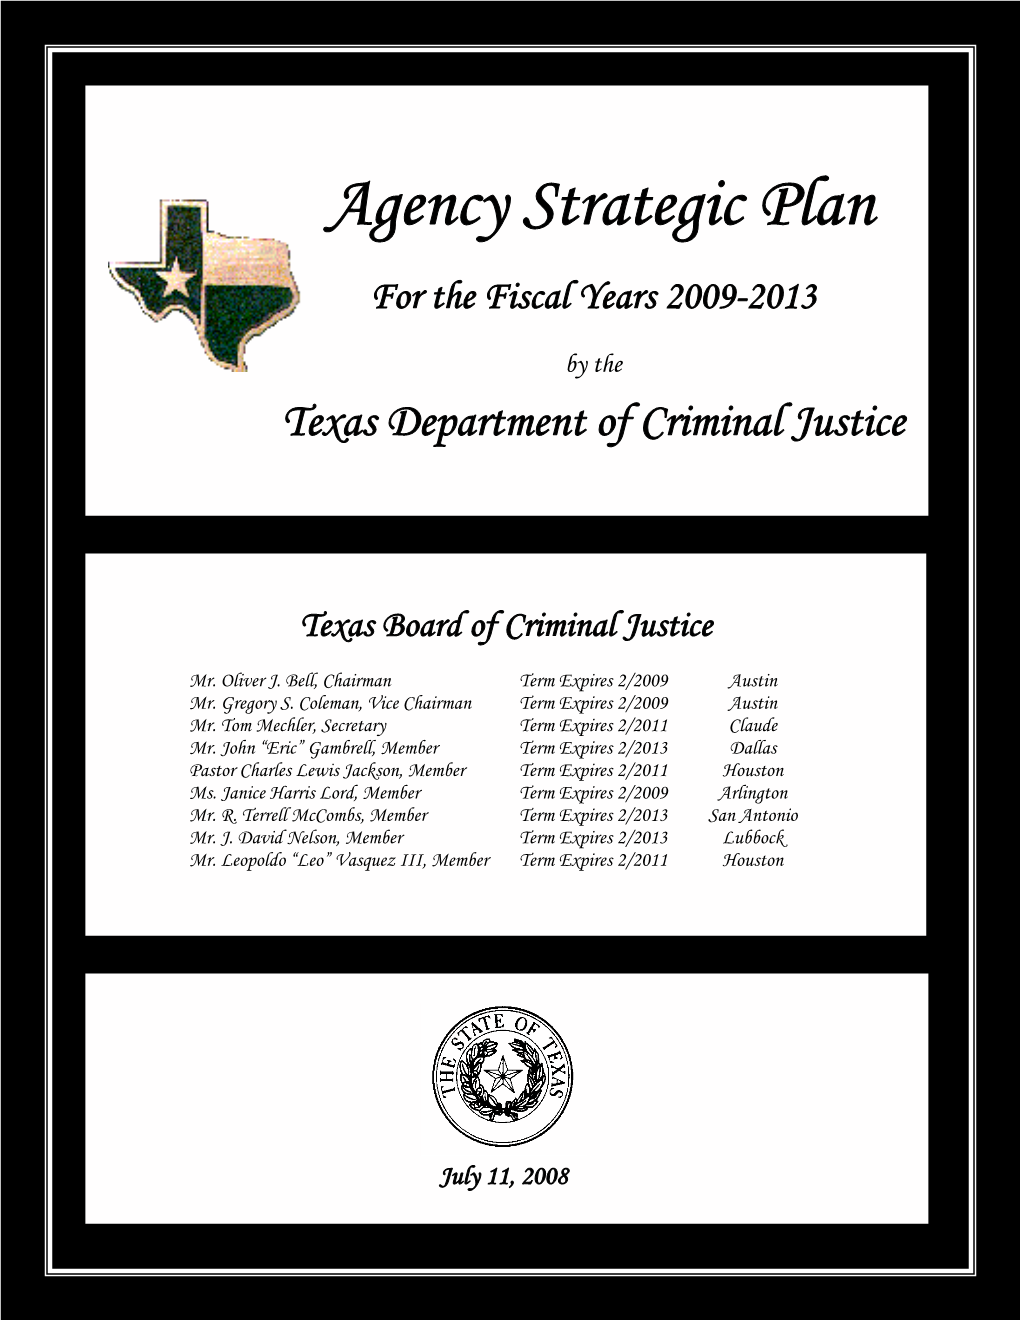 Agency Strategic Plan for the Fiscal Years 2009-2013